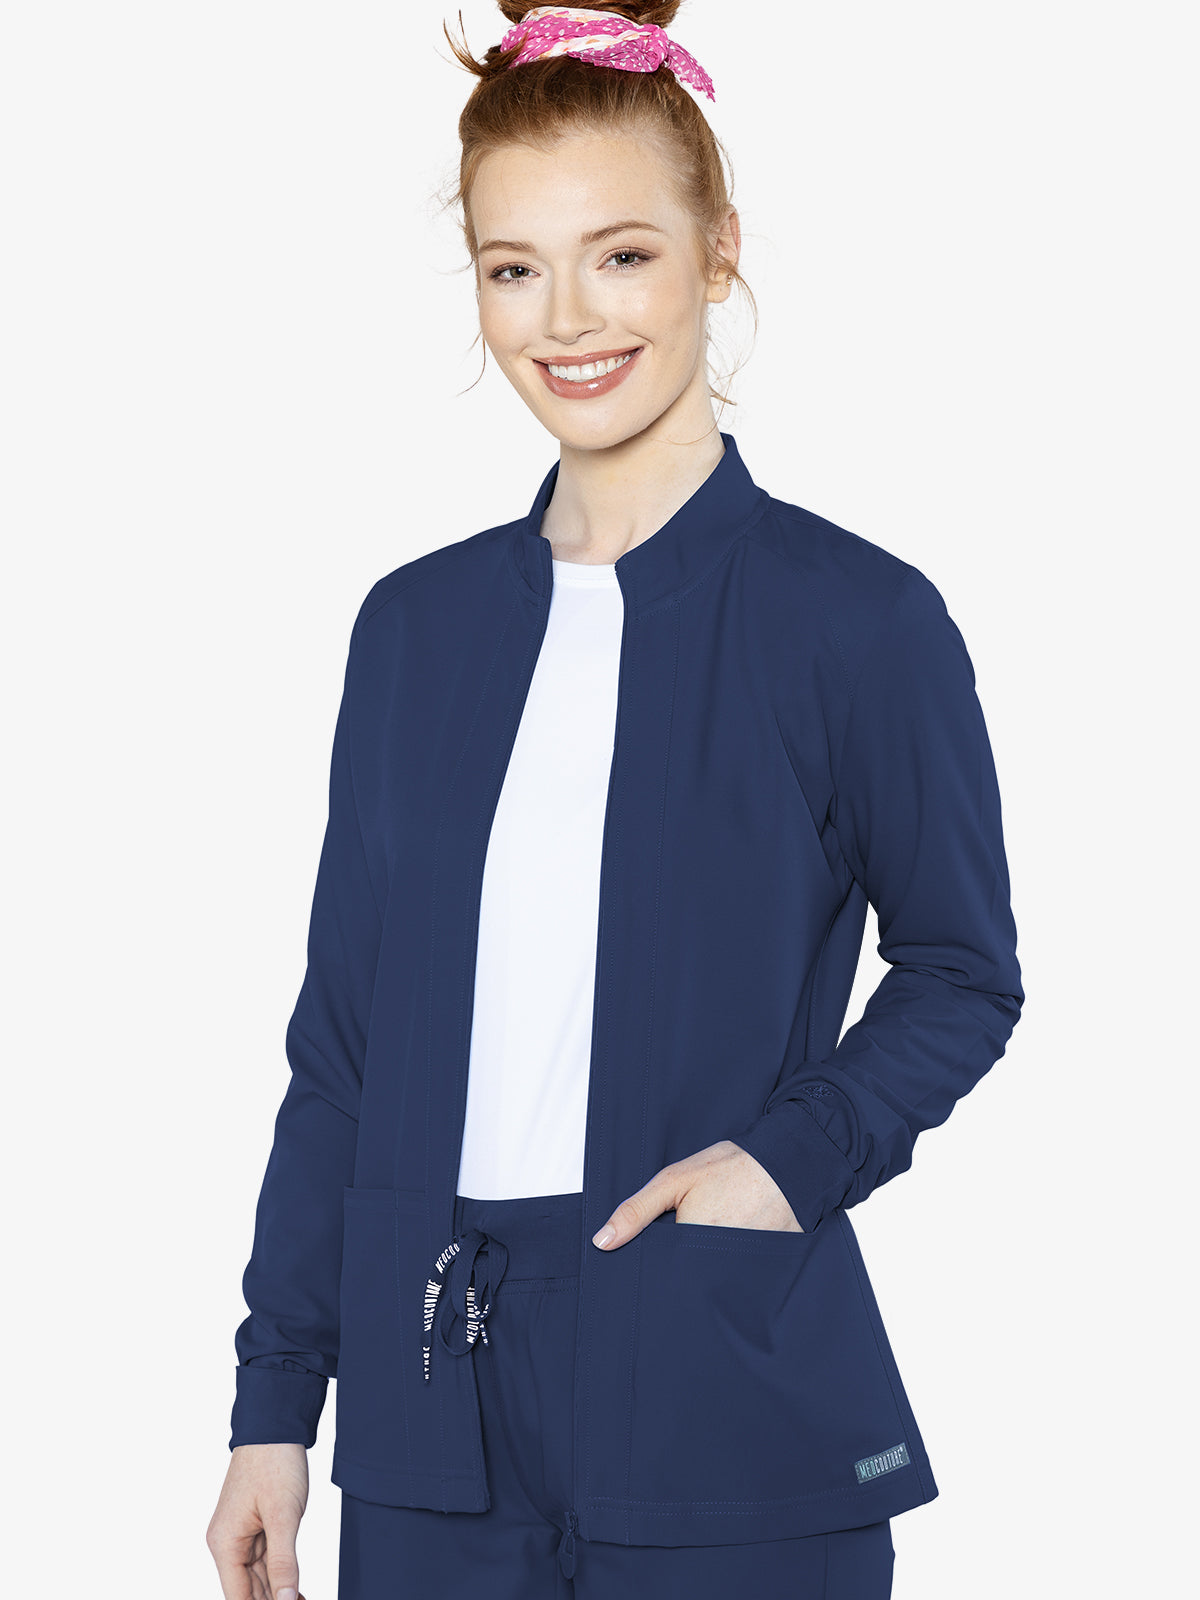 Med Couture 2660 Insight Women's Zip Front Warmup Jacket Navy 